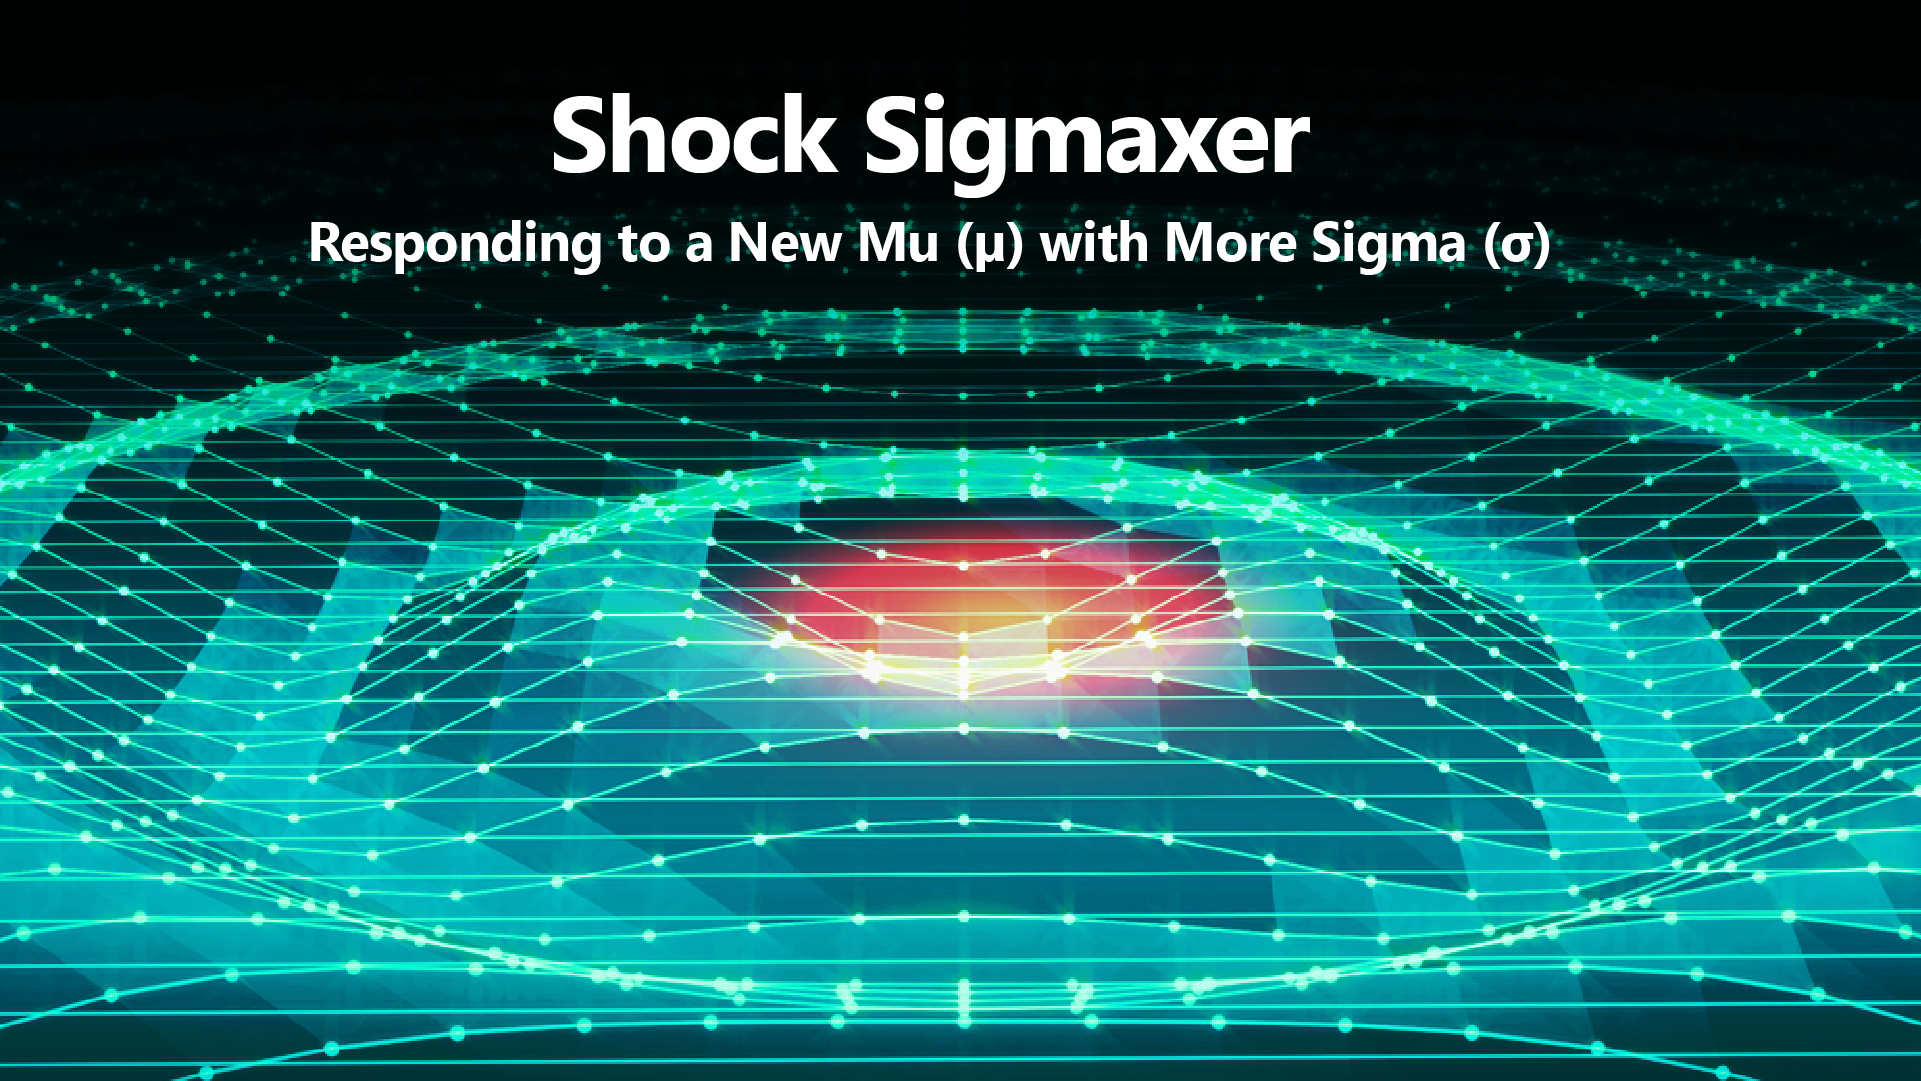 SHOCK SIGMAXER – Responding to a New Mu μ with More Sigma σ